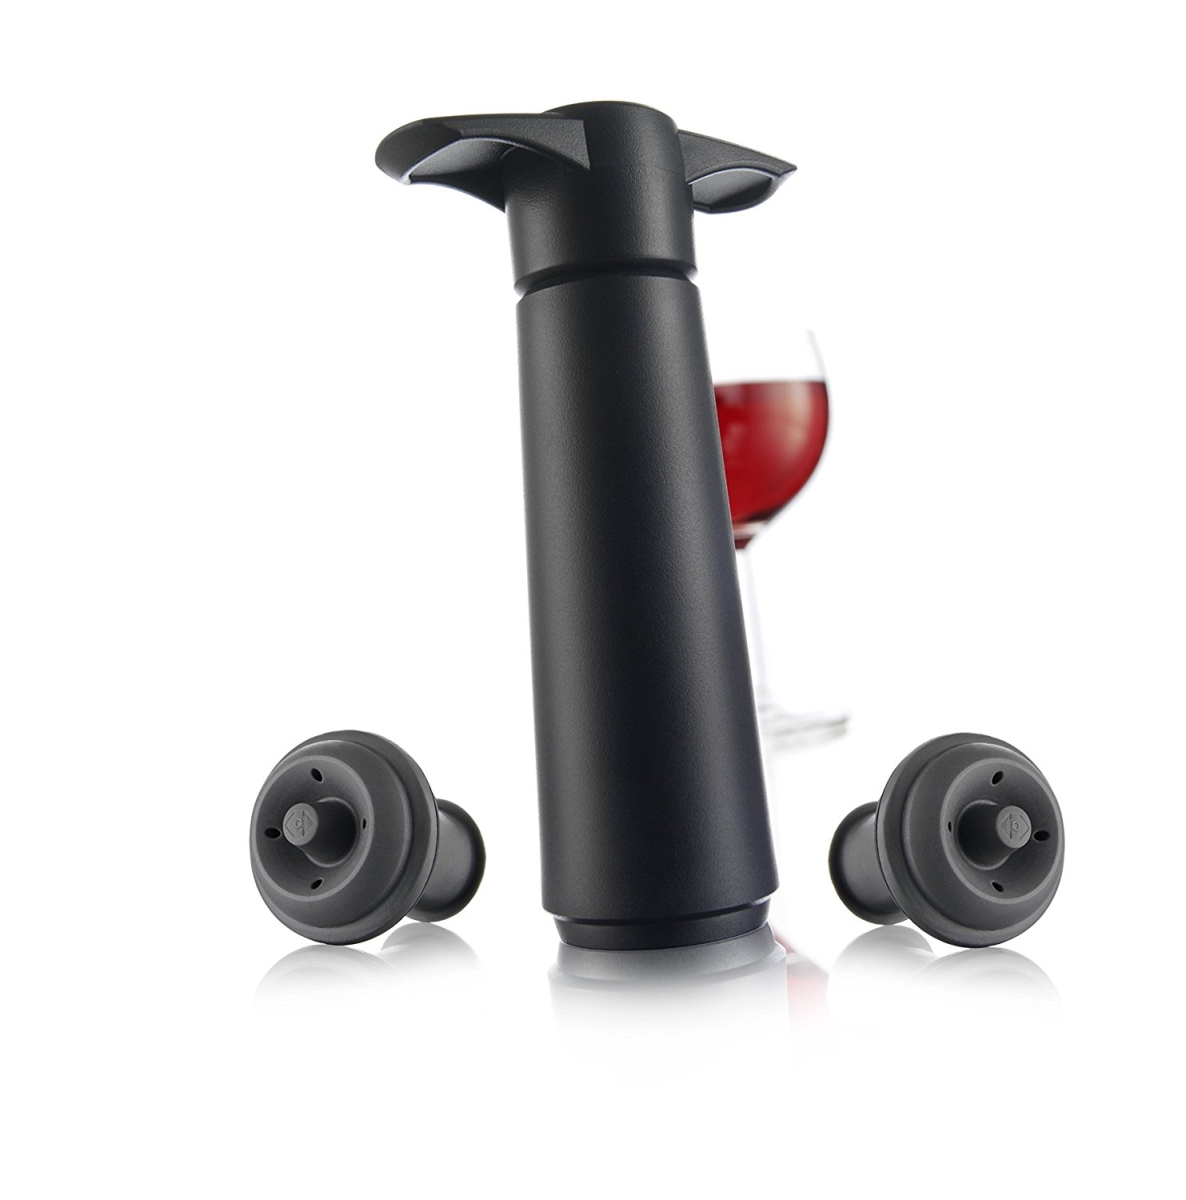 Picture of Vacu Vin 9814606 Wine Saver Giftpack, Black - 1 Pump & 2 Stoppers